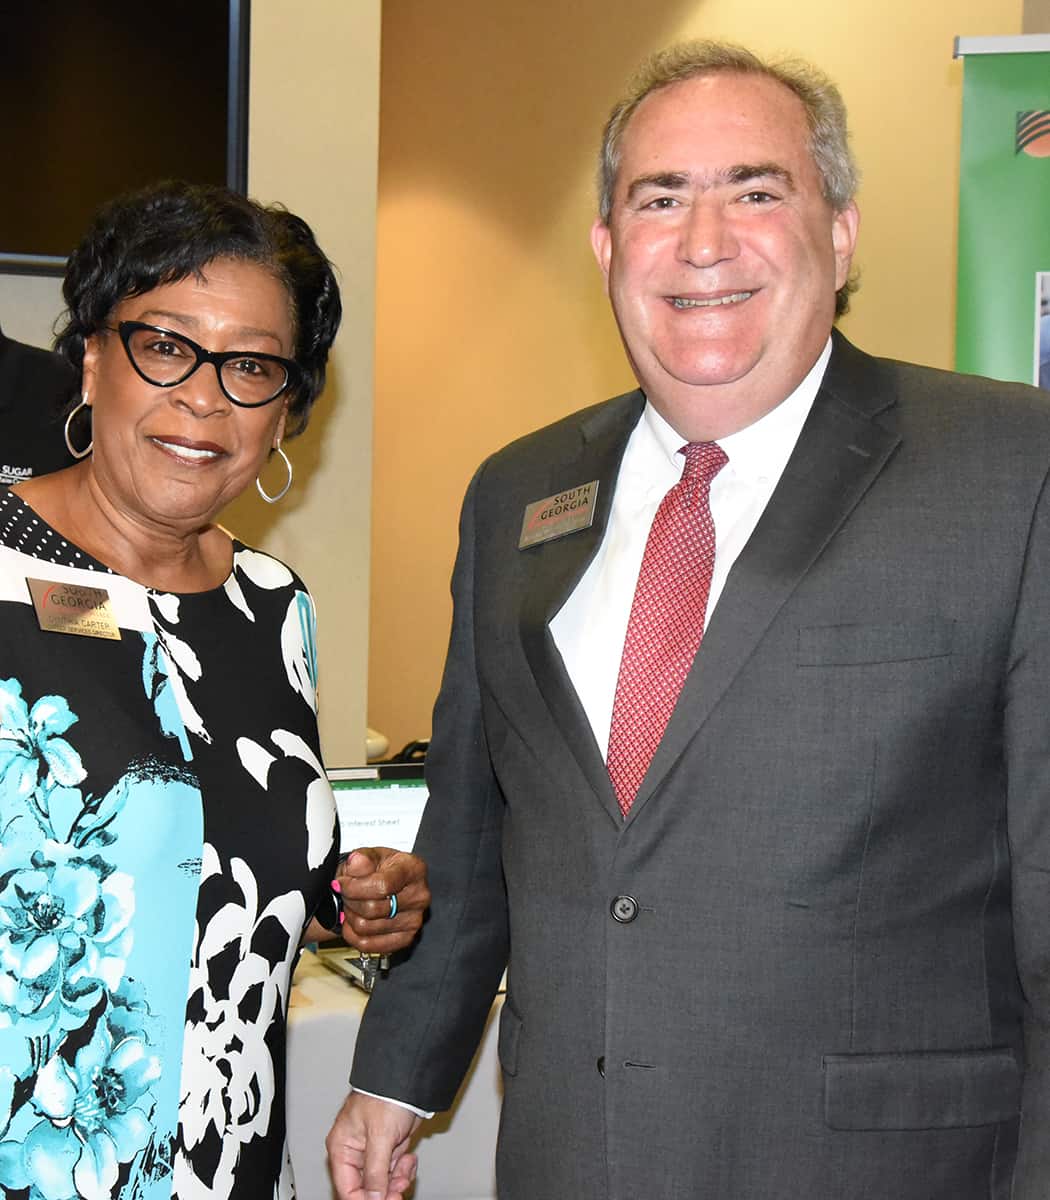 South Georgia Technical College Director of Career Services Cynthnia Carter is shown above with SGTC Director of Business and Industry Services and Interim VP of Academic Affairs Paul Farr at the SGTC Career Fair Hiring event.